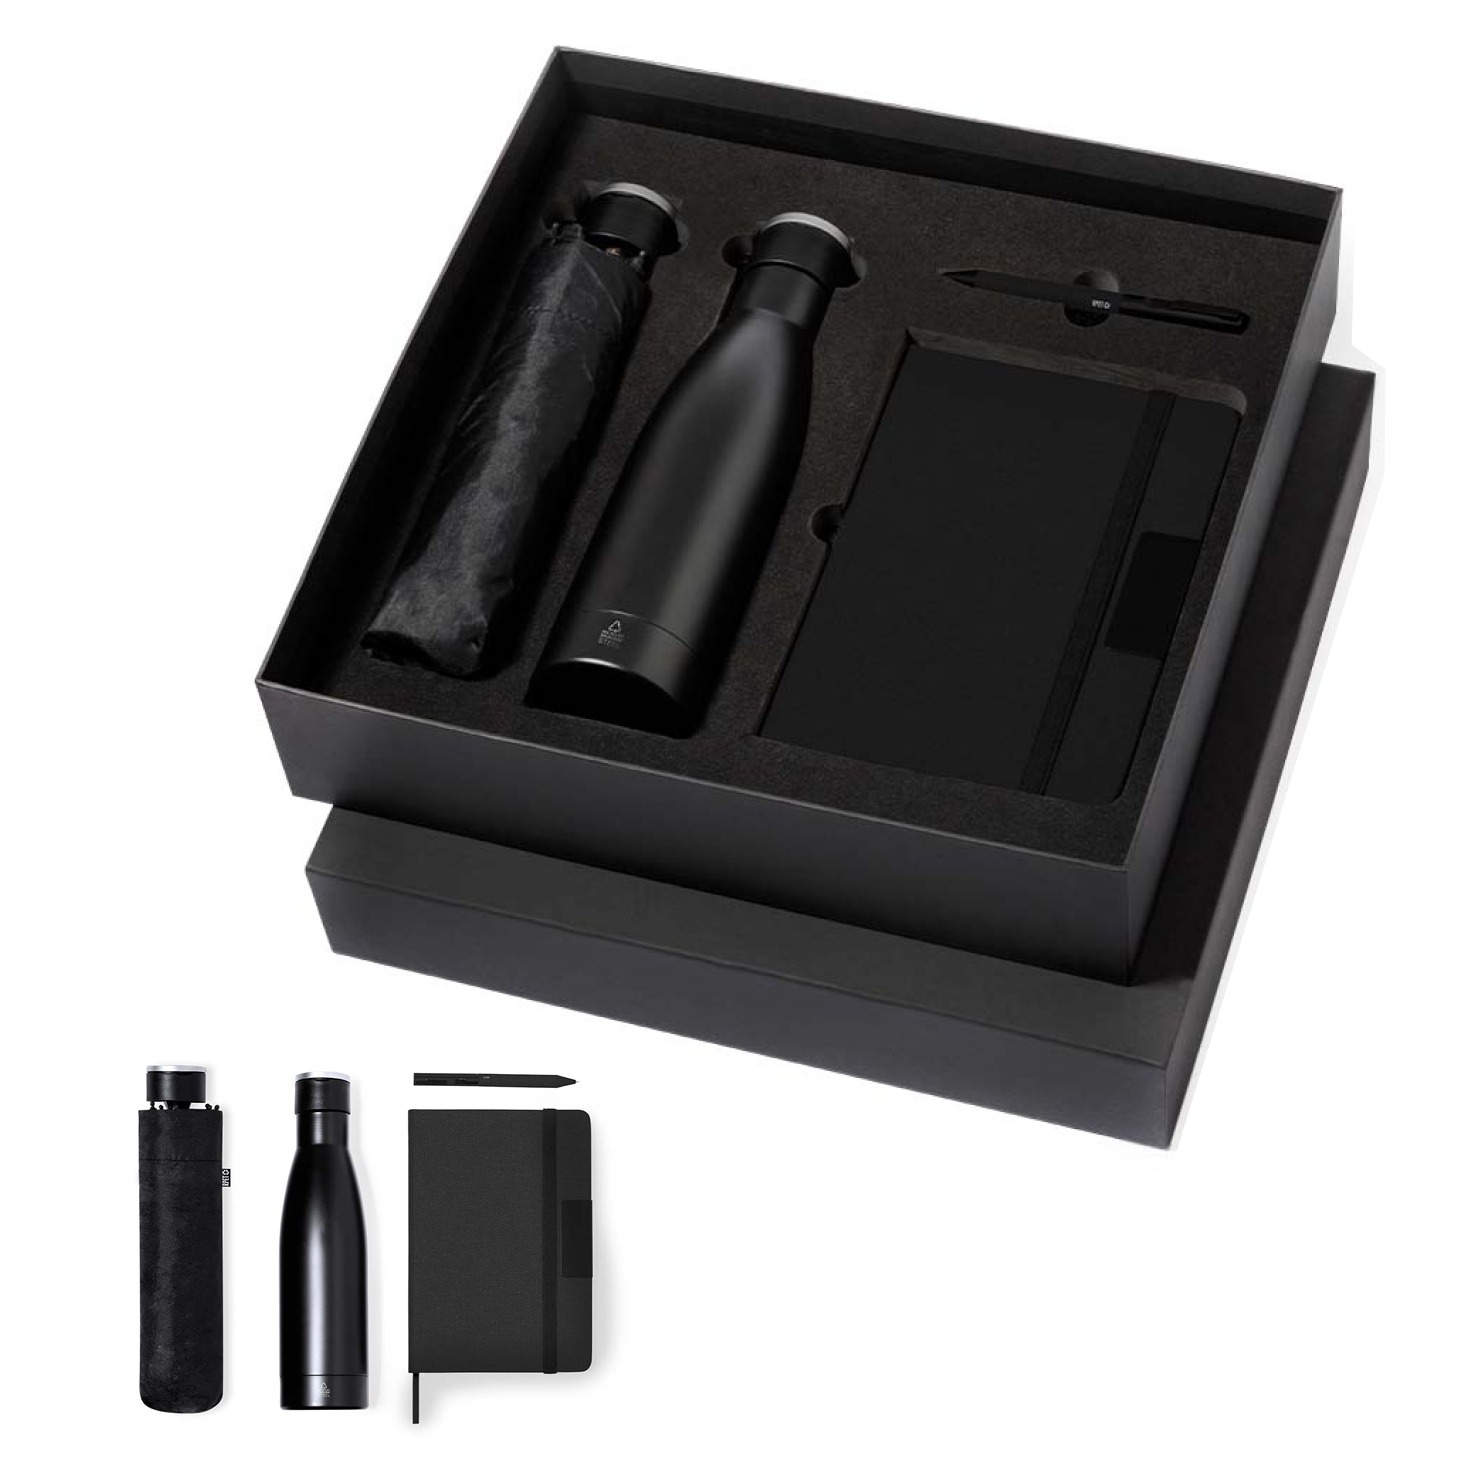 Black box with promotional products in it. Included in the box: pocket umbrella,water bottle, notebook and a pen